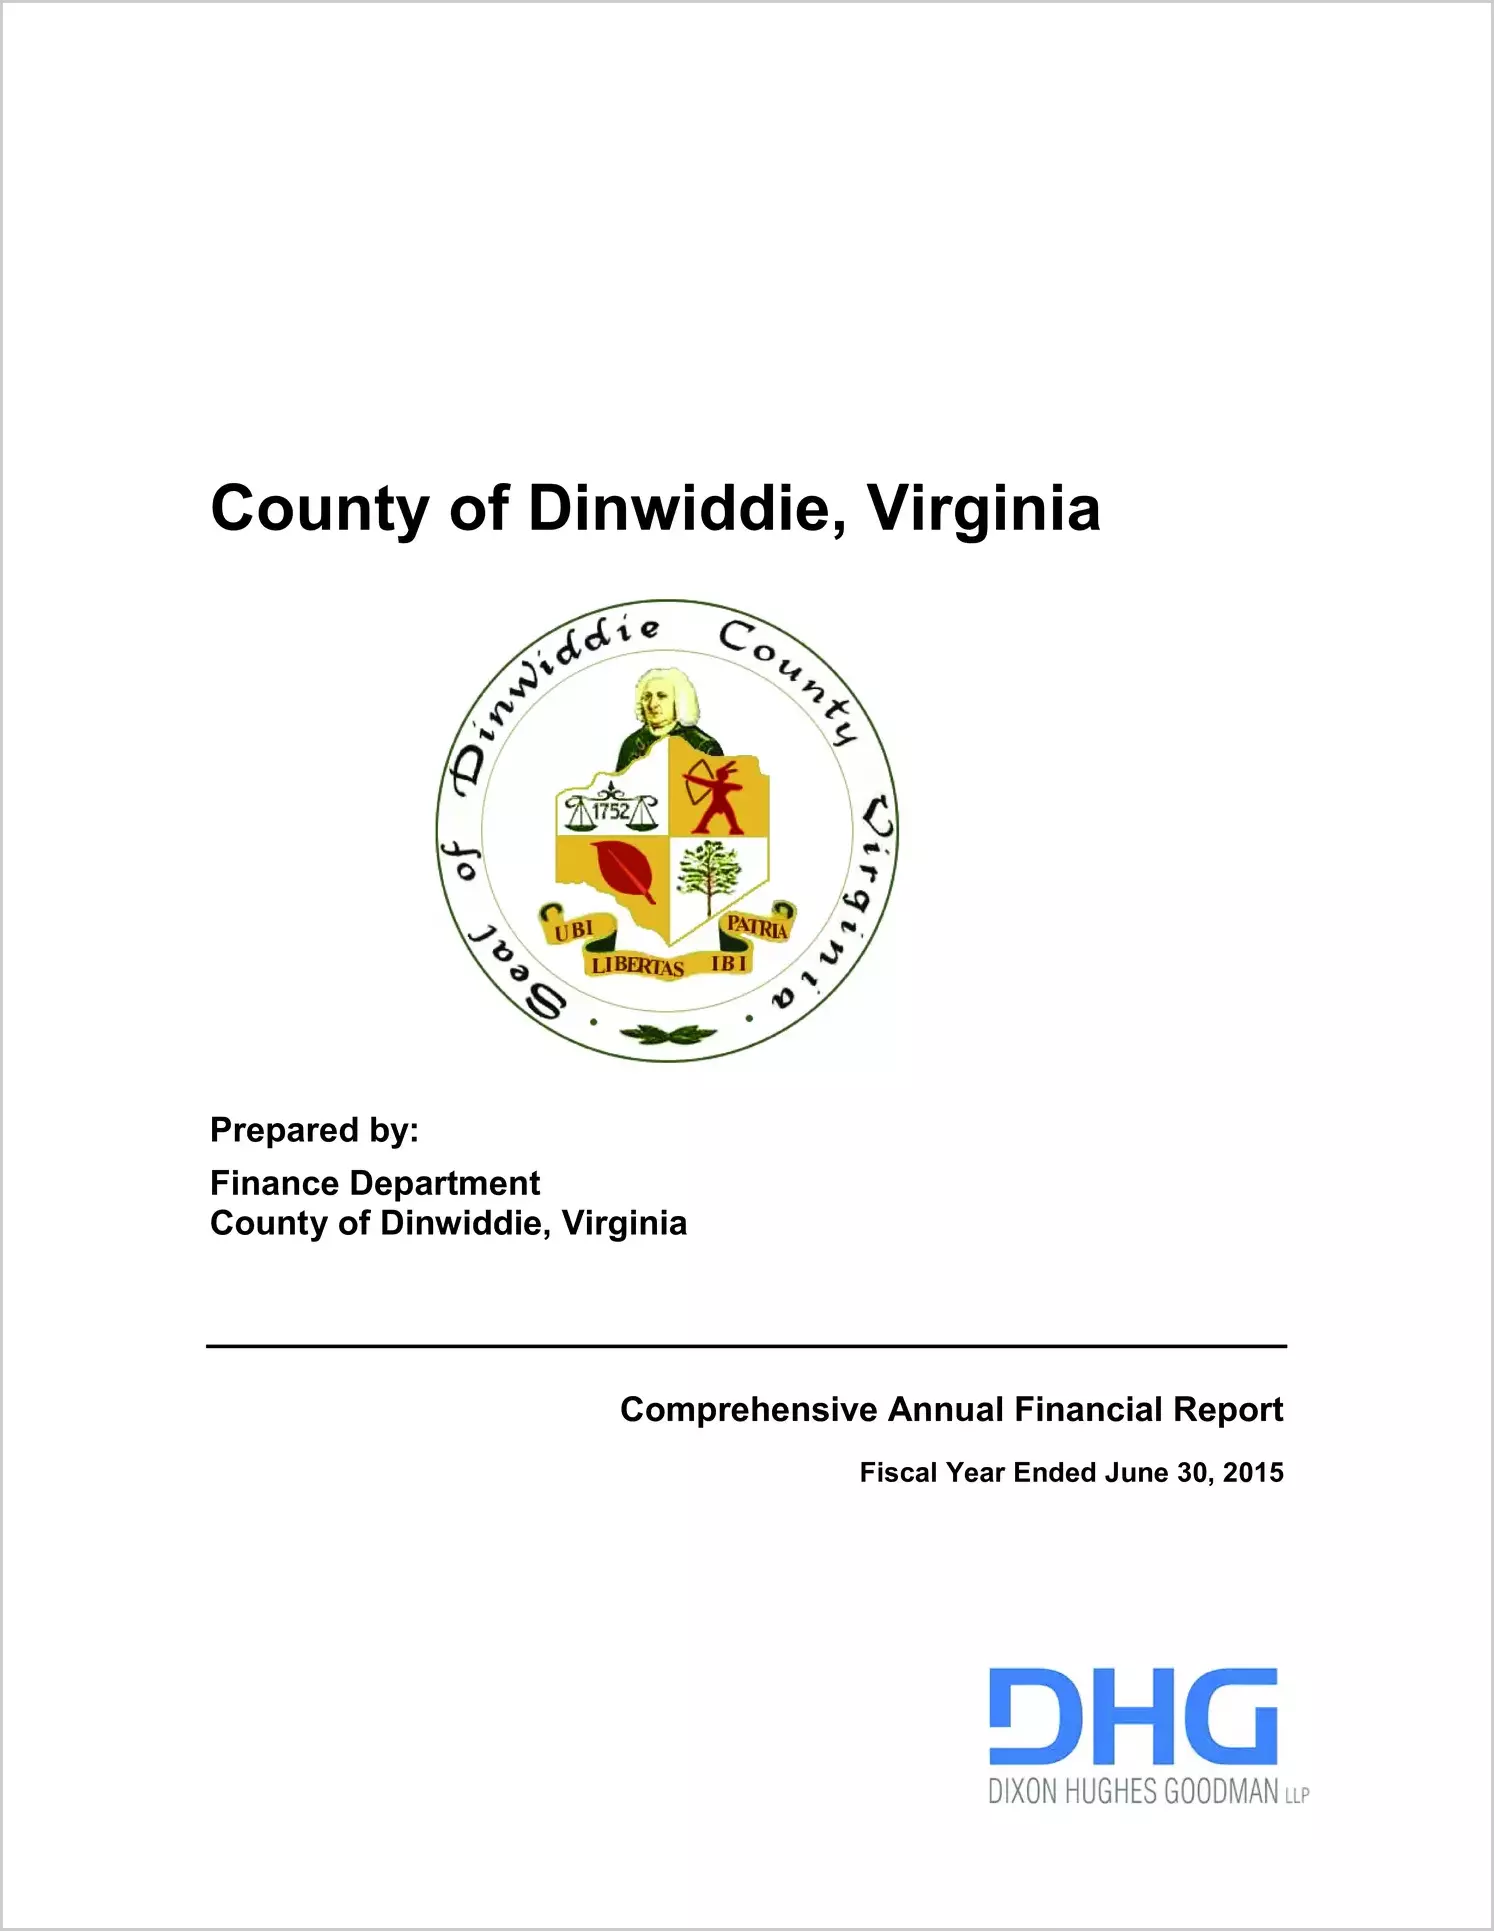 2015 Annual Financial Report for County of Dinwiddie